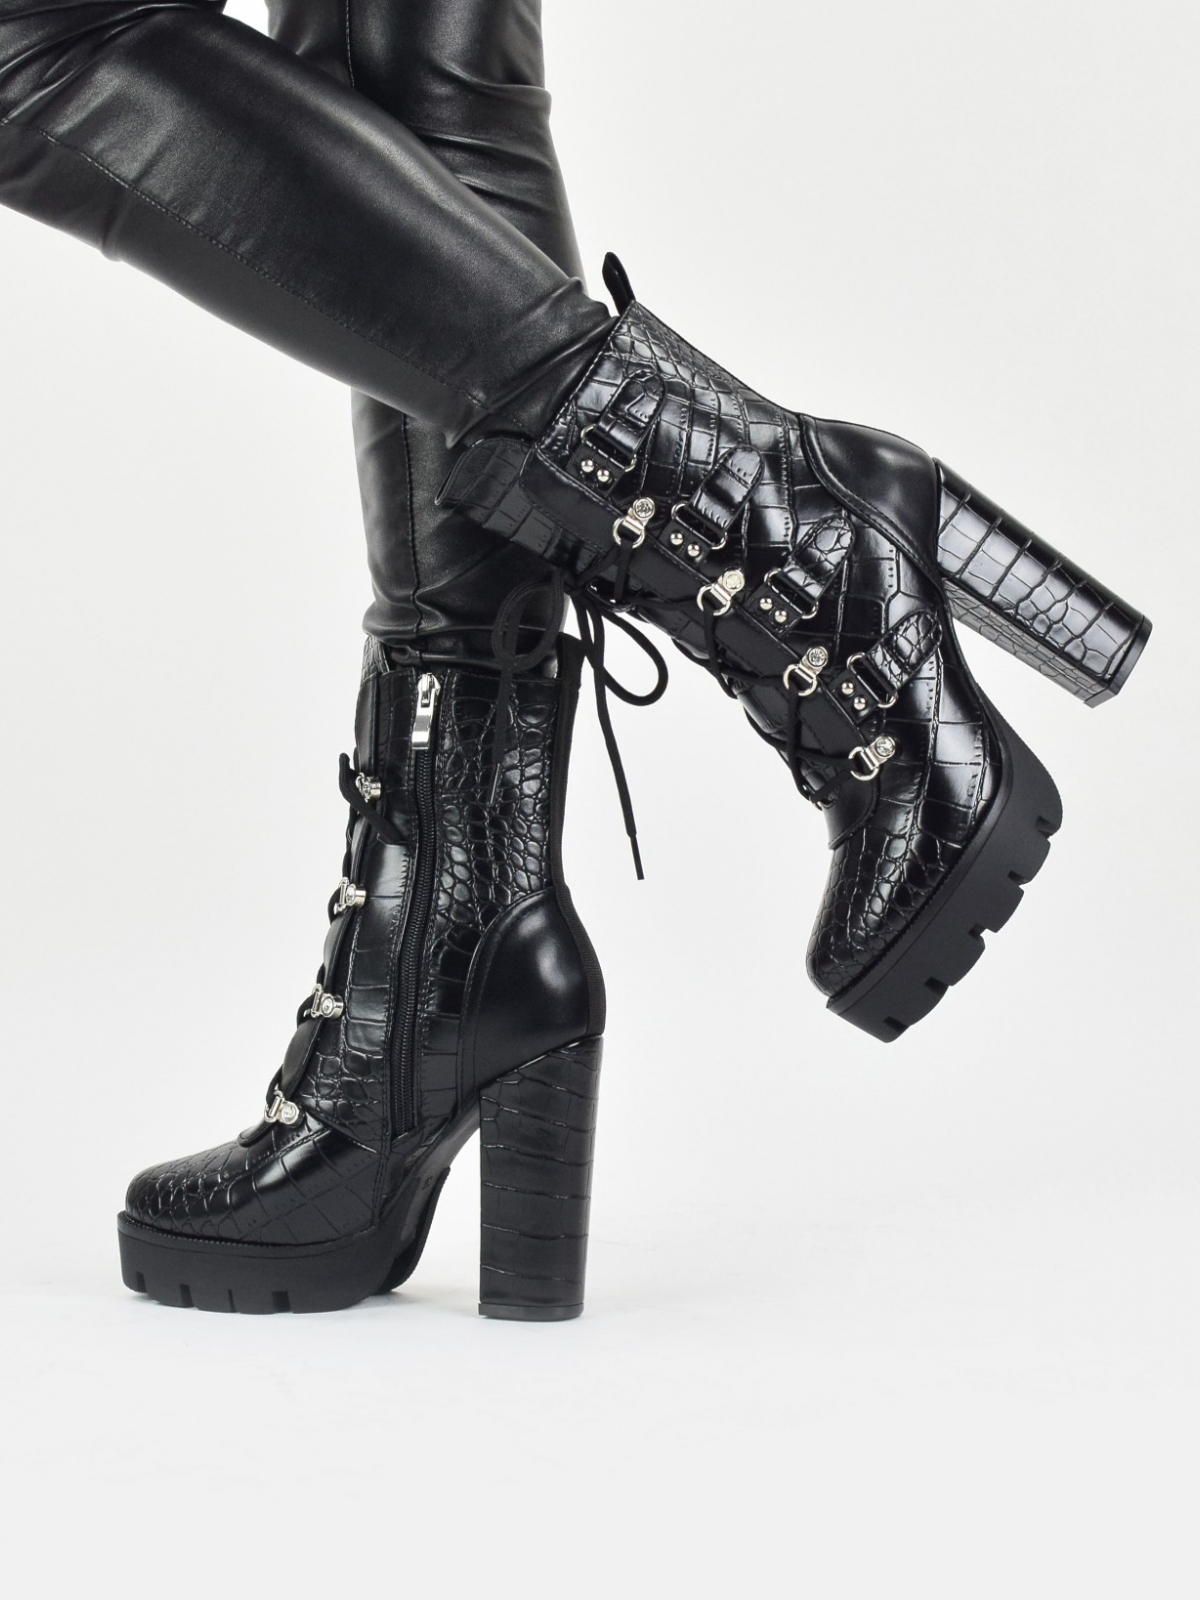 High heeled lace up platform boots in black snake patent